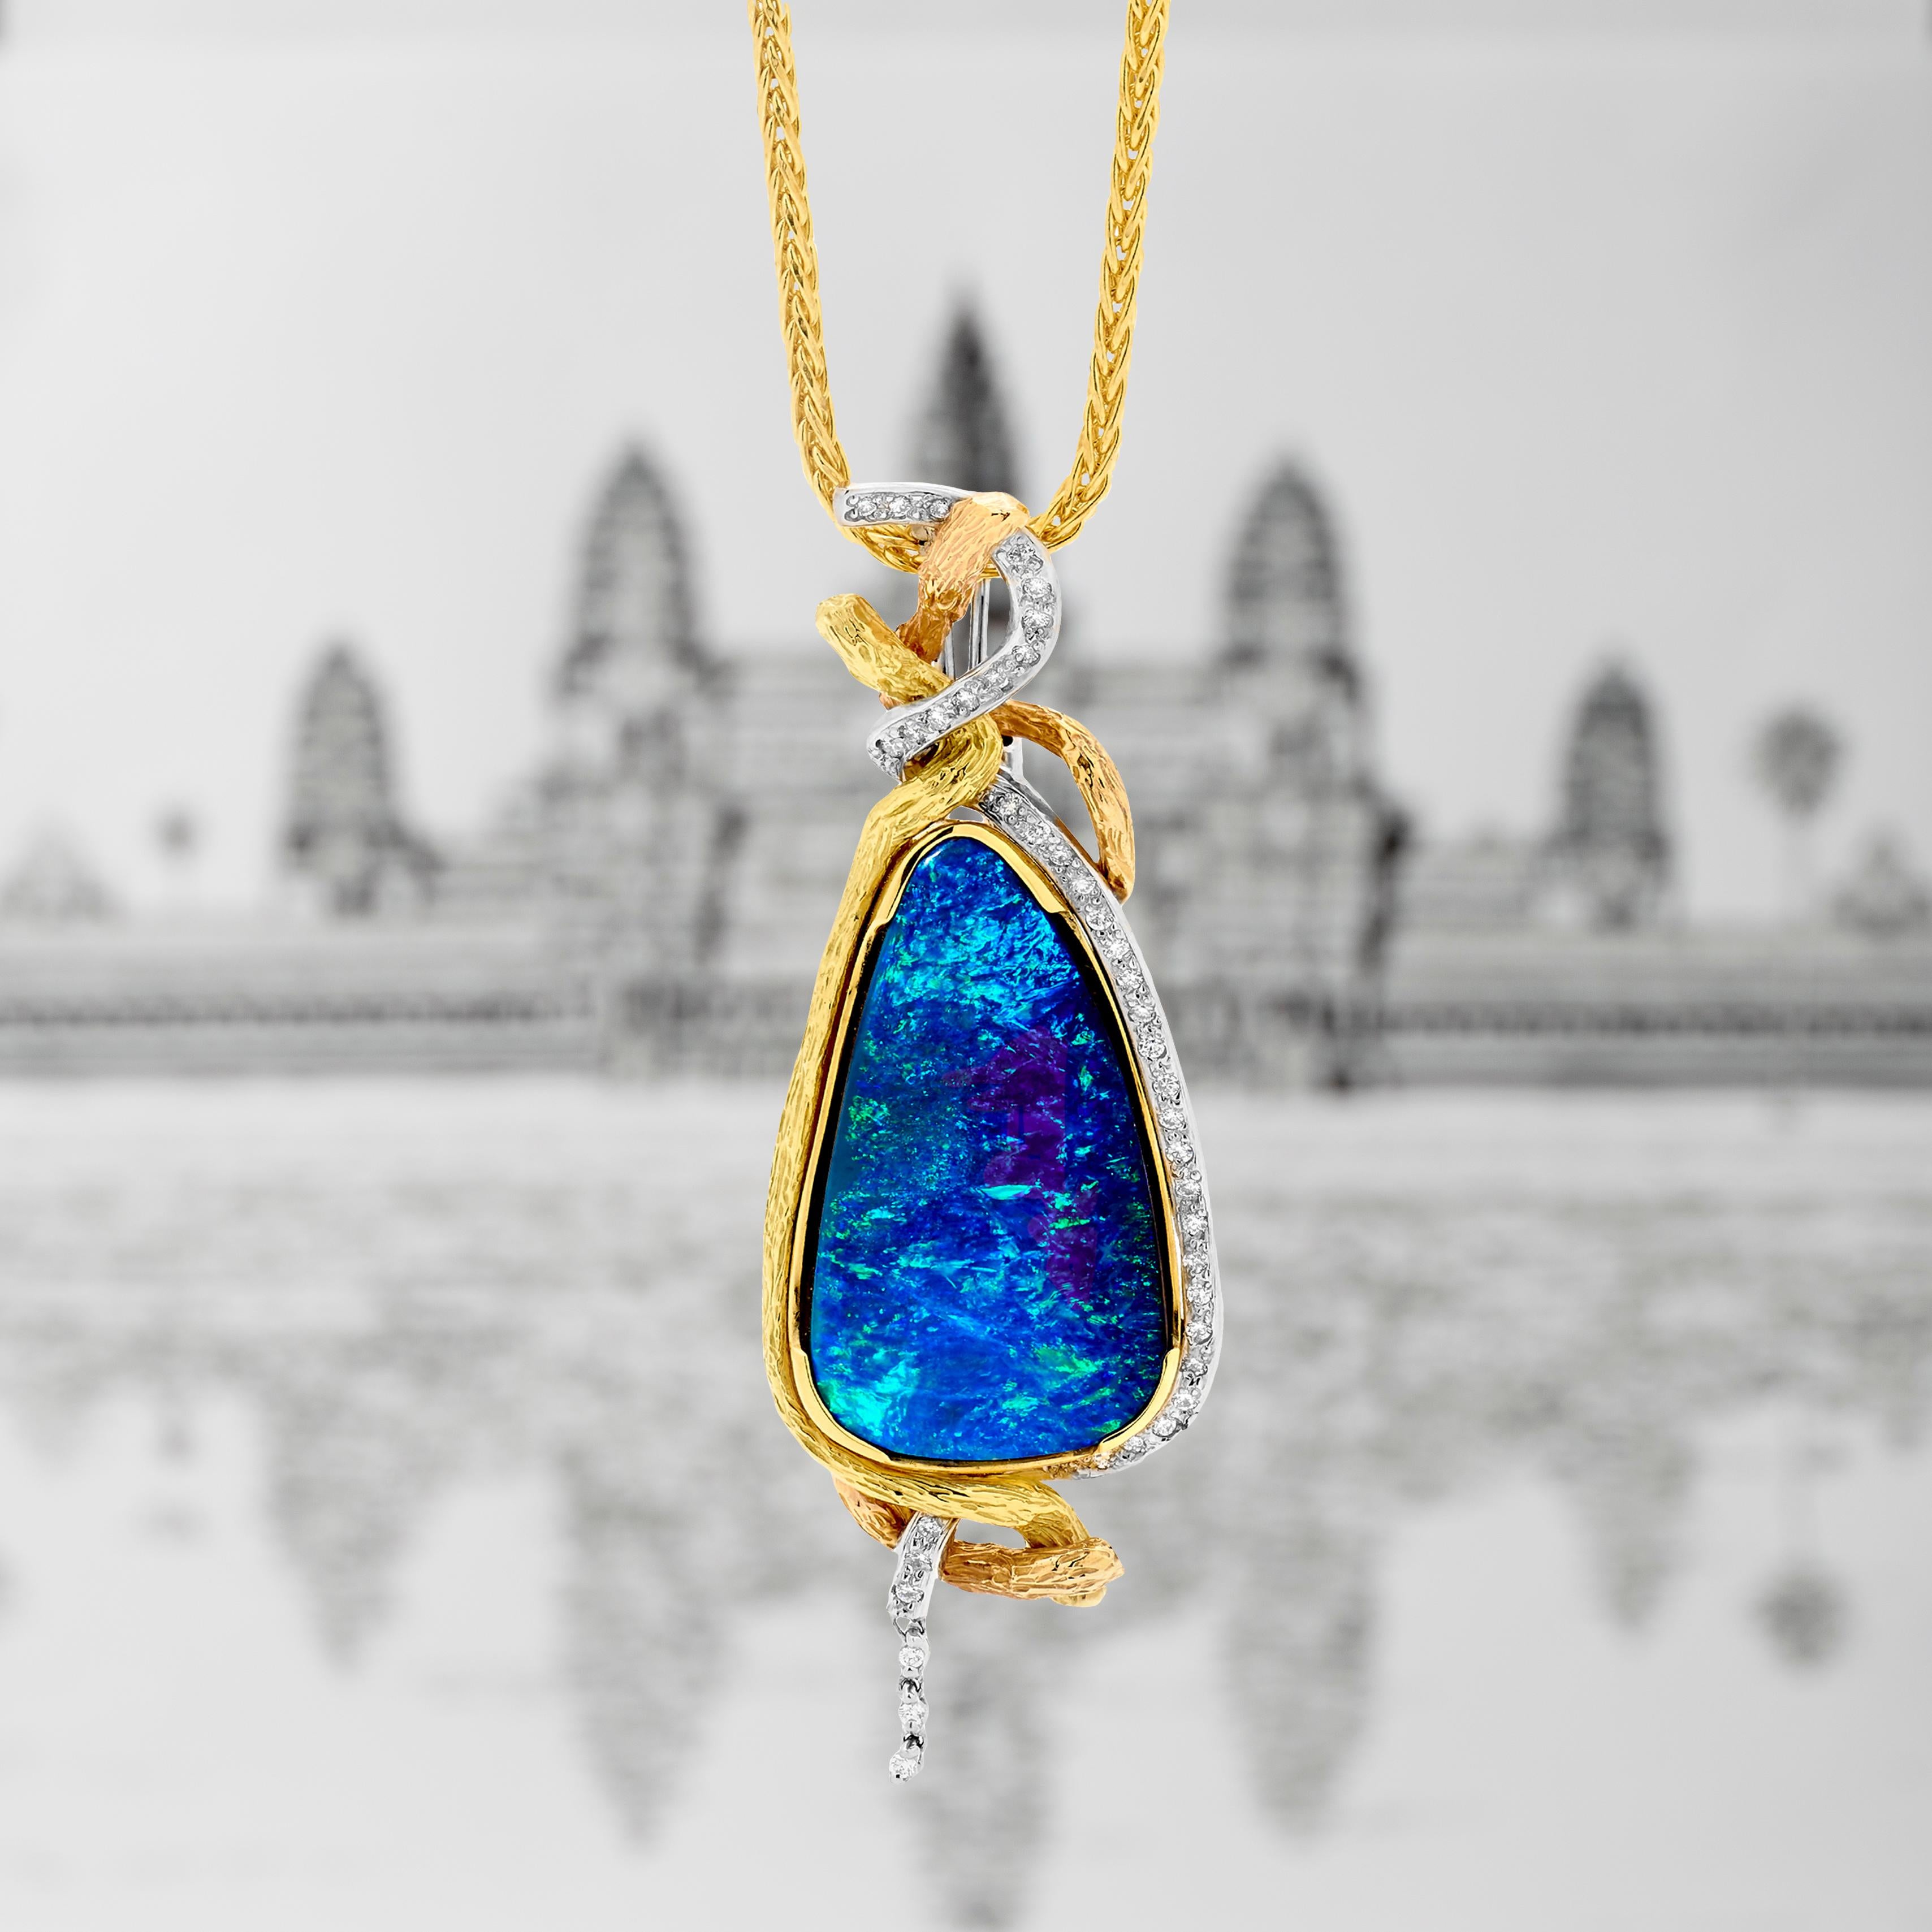 The power of nature cradling the remnants of an ancient civilisation of Angkor in Cambodia inspired Renata Bernard to create the Ta Prohm set of a pendant, ring and earrings. The “Ta Prohm” boulder opal pendant is an exceptional handmade piece set